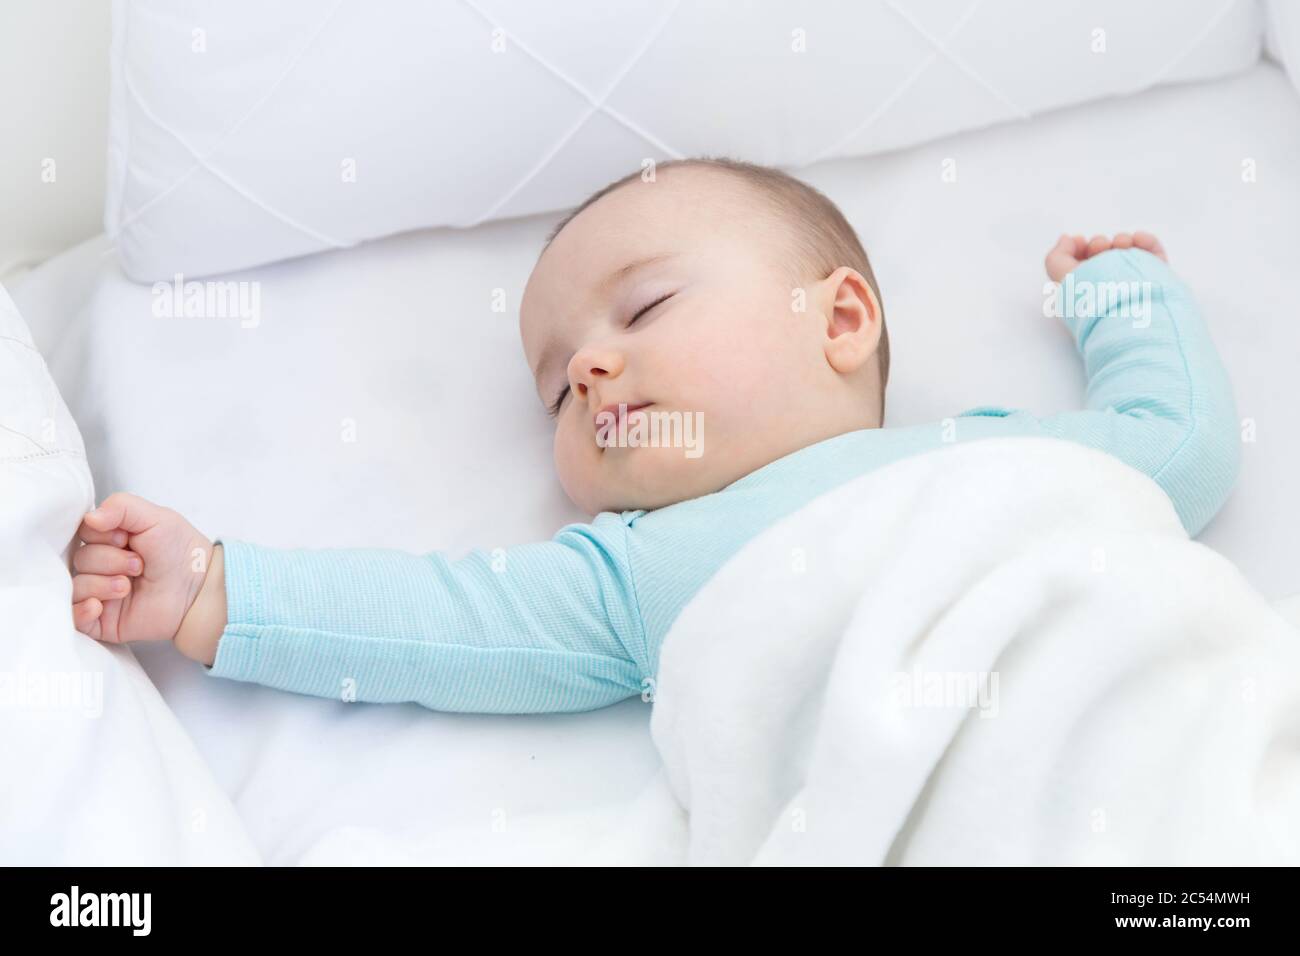 Baby sleeping with a pacifier aside. Light blue pajama and white bed sheets. Stock Photo